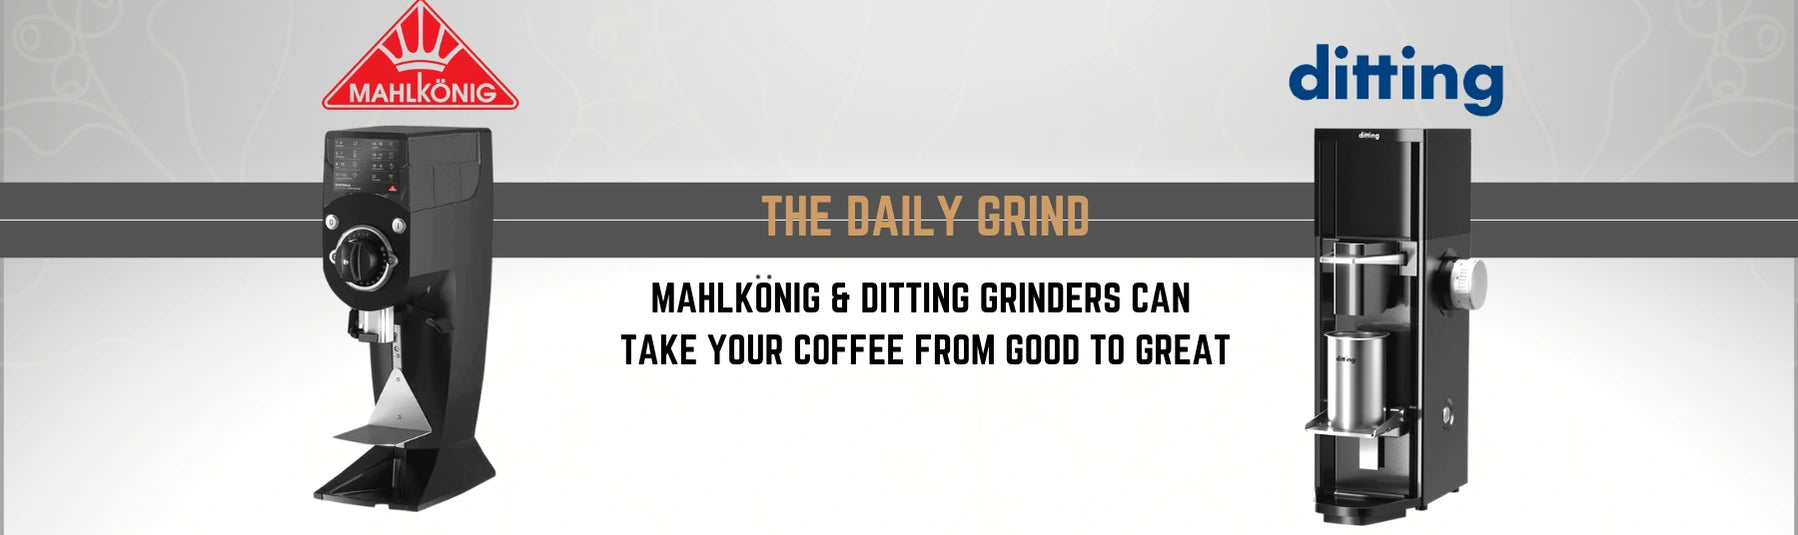 The Daily Grind: Ditting & Mahlkönig Grinders Can Take Your Coffee From Good To Great